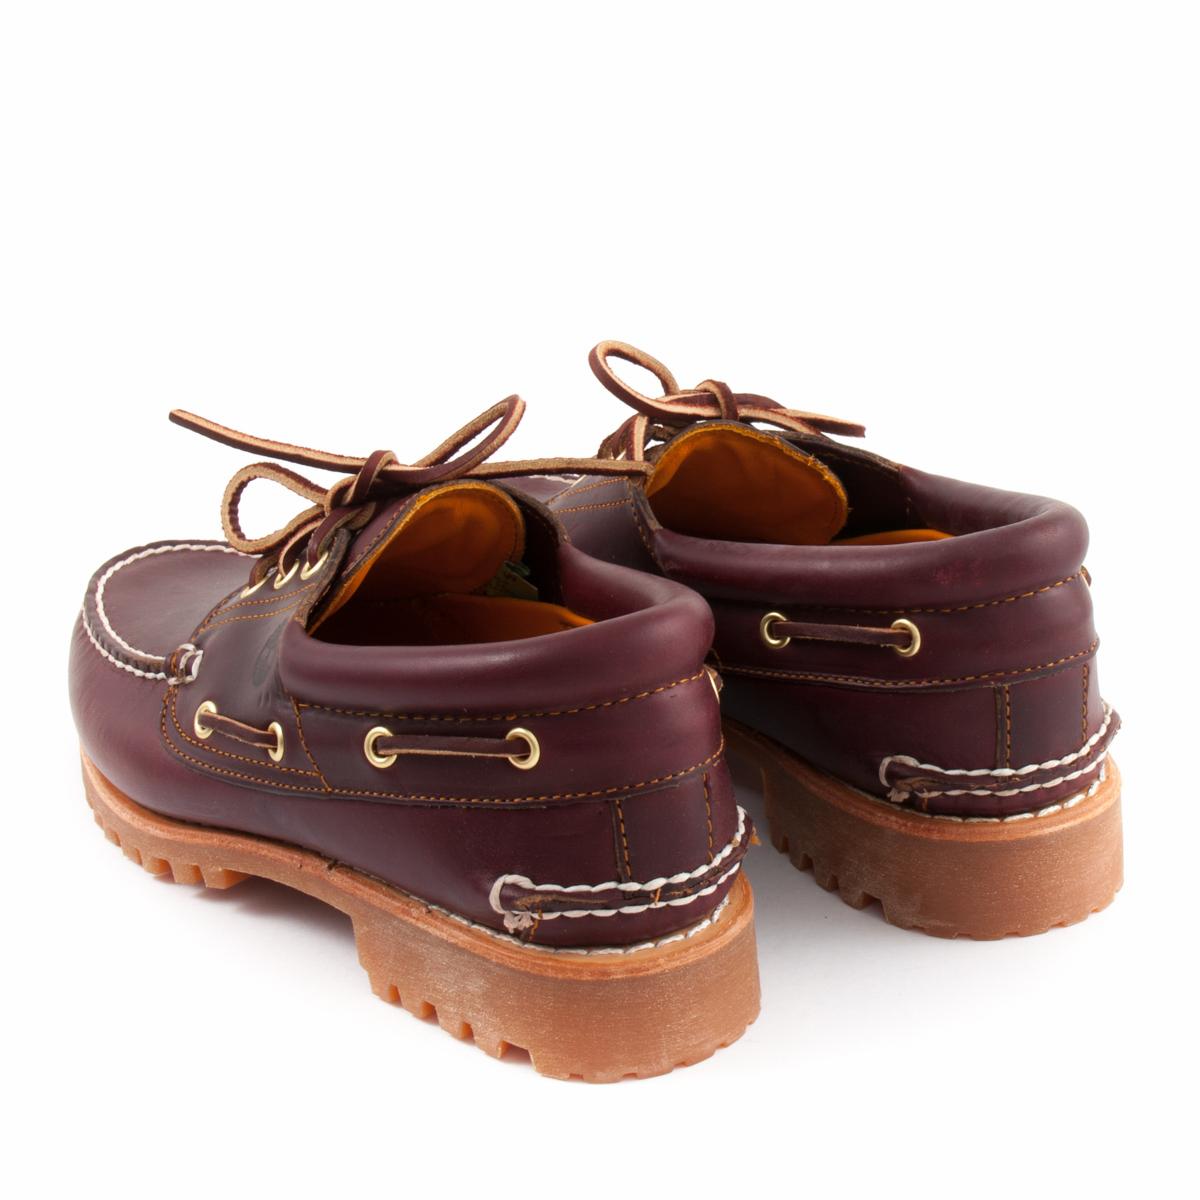 siren National census fluctuate Boat Shoes TIMBERLAND 50009 3-Eye Classic Lug Burgundy